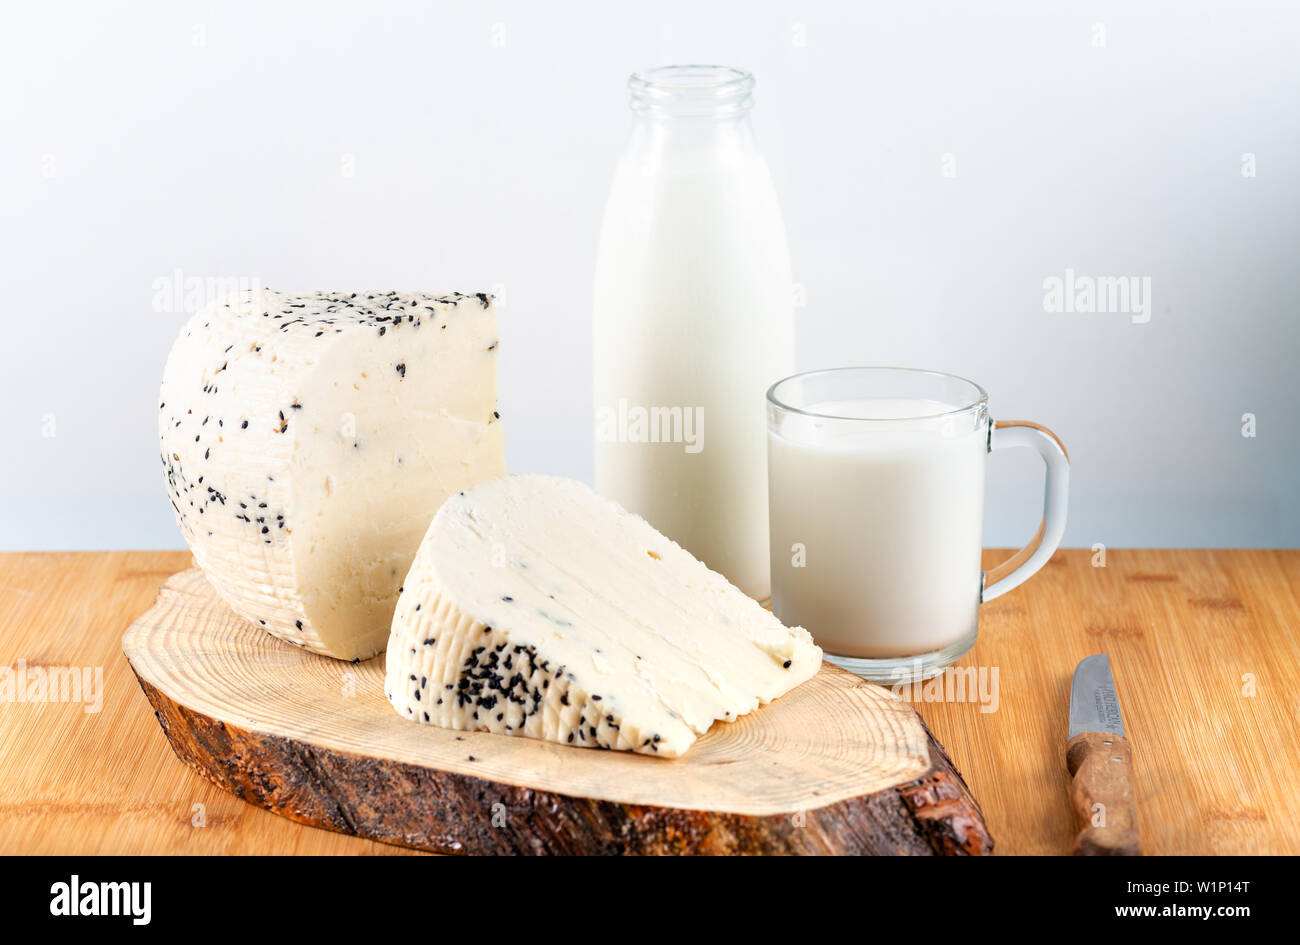 Cheese with black cumin seeds with bottle of milk on wooden background. Stock Photo